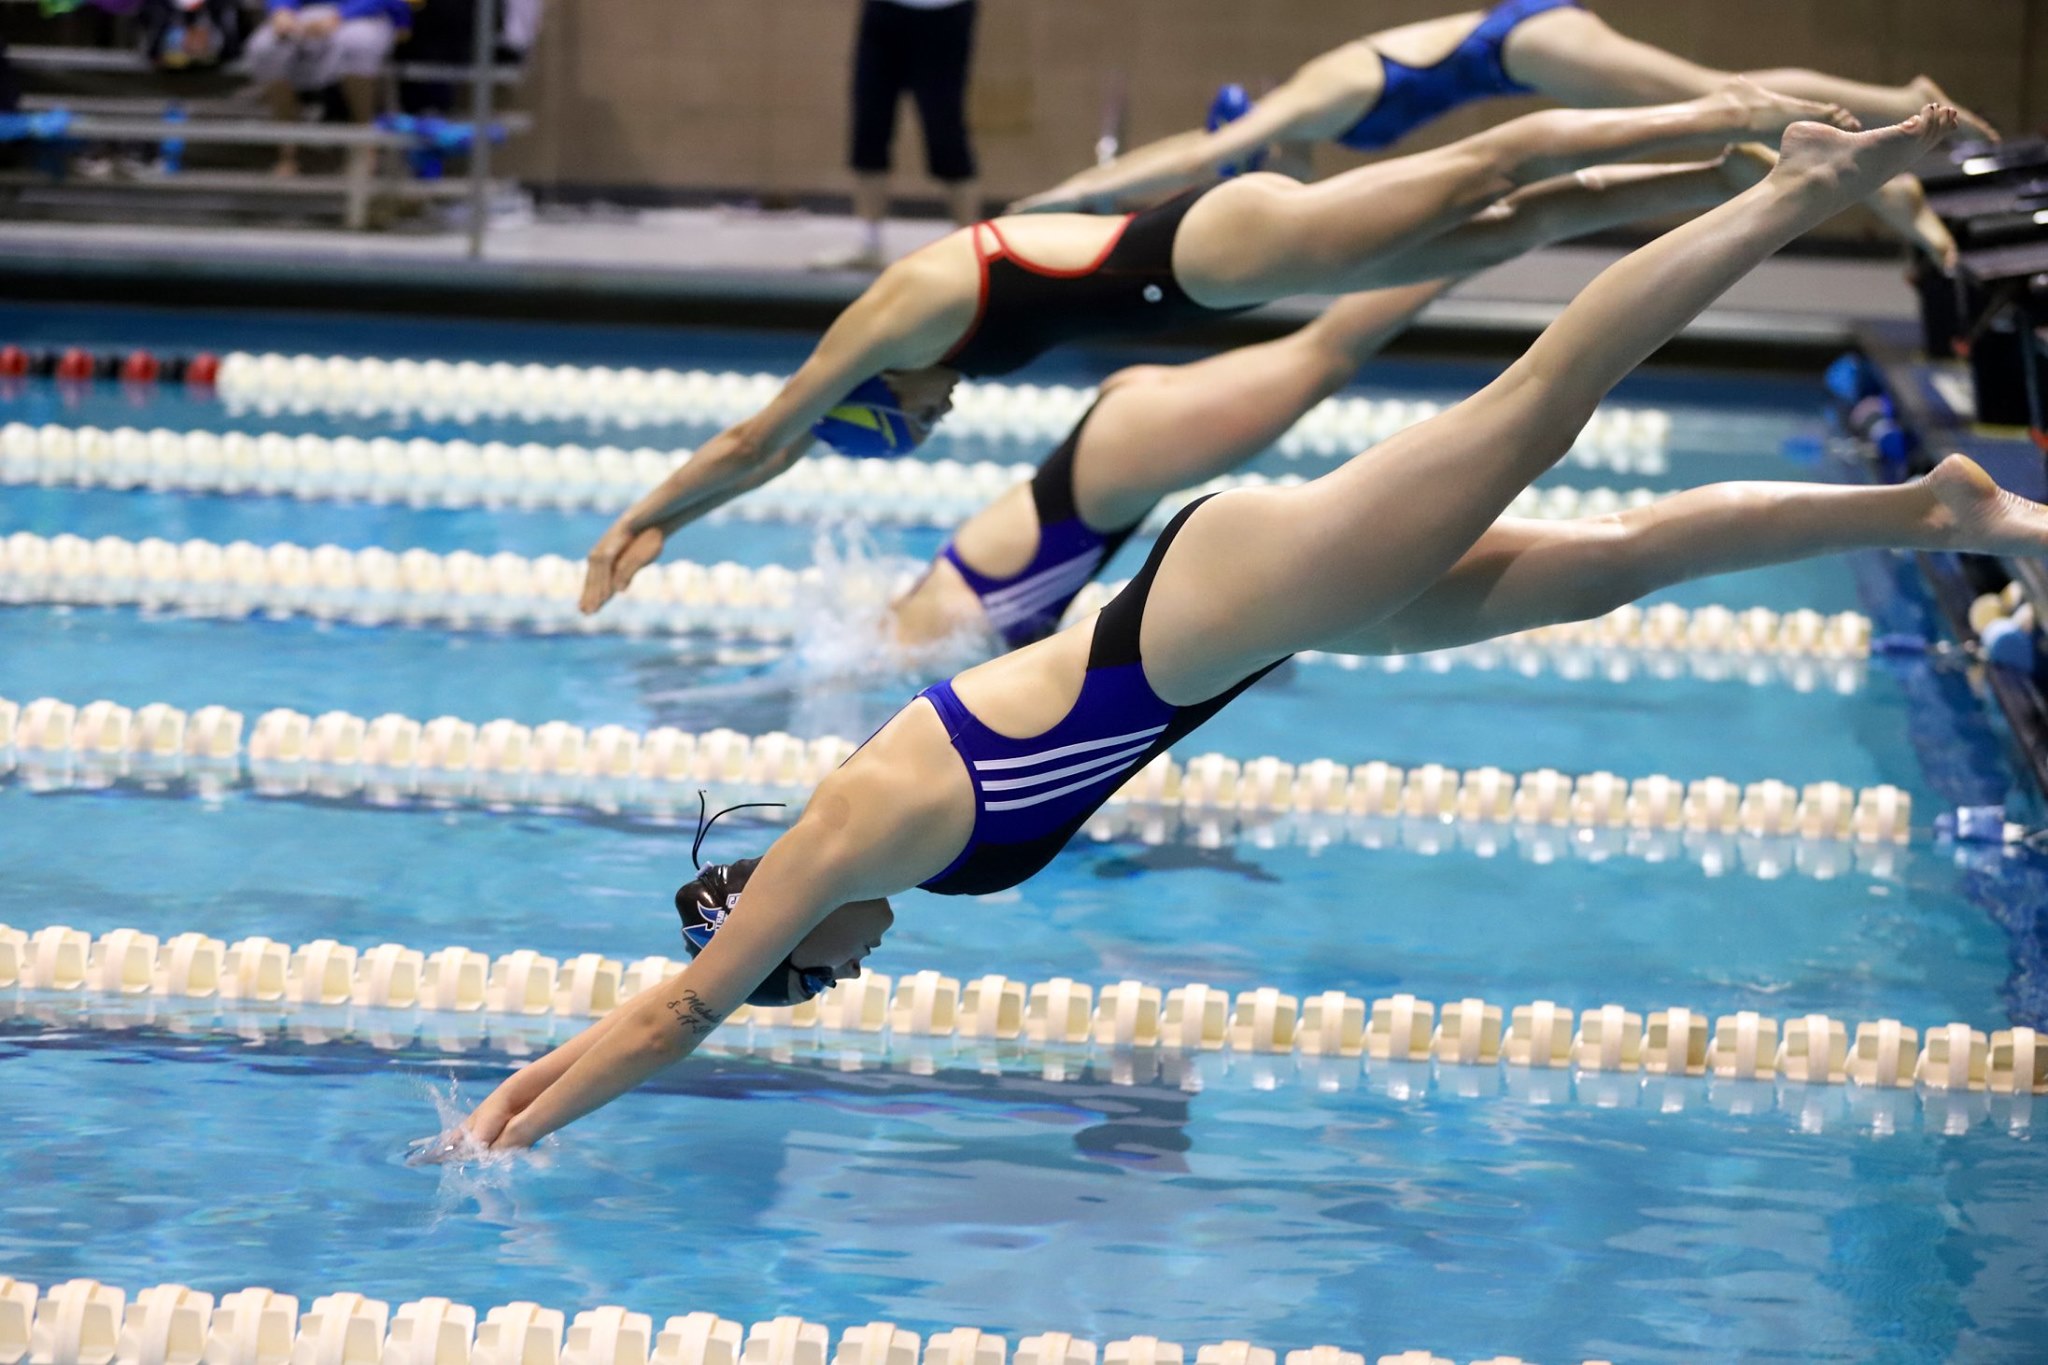 Tritons record several season, personal best times